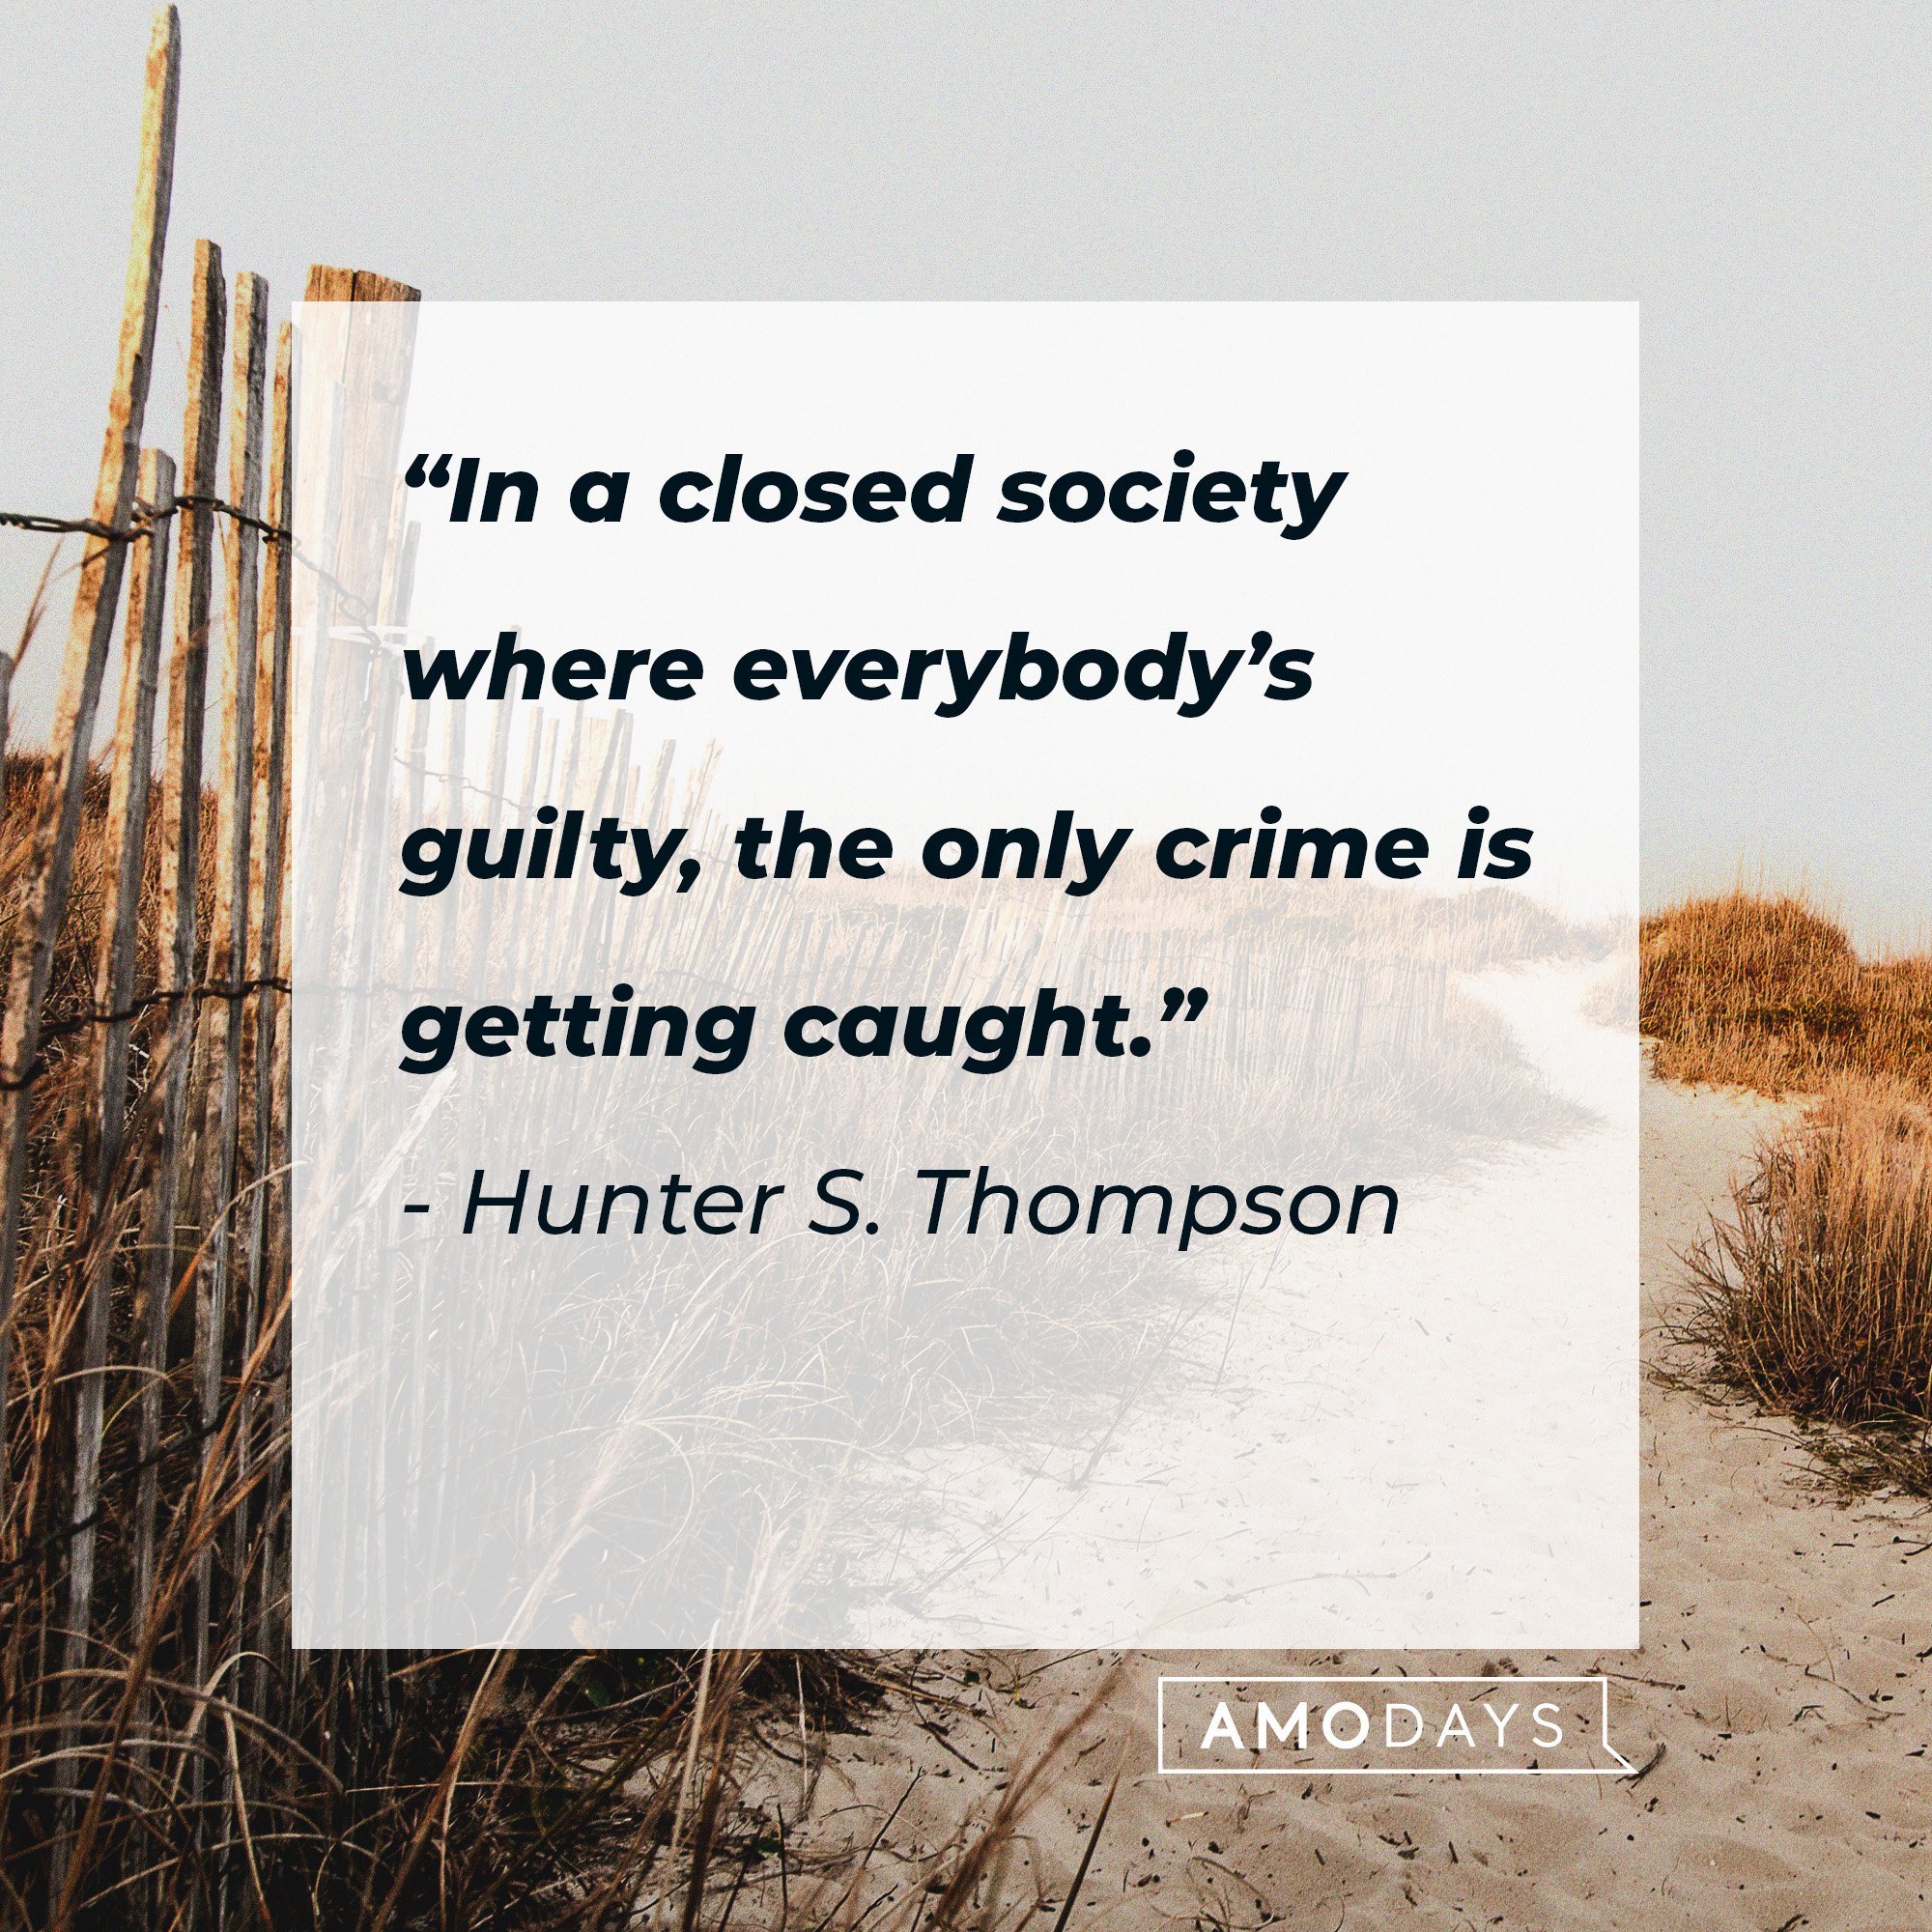 Hunter S. Thompson’s quote: “In a closed society where everybody’s guilty, the only crime is getting caught.” | Image: AmoDays